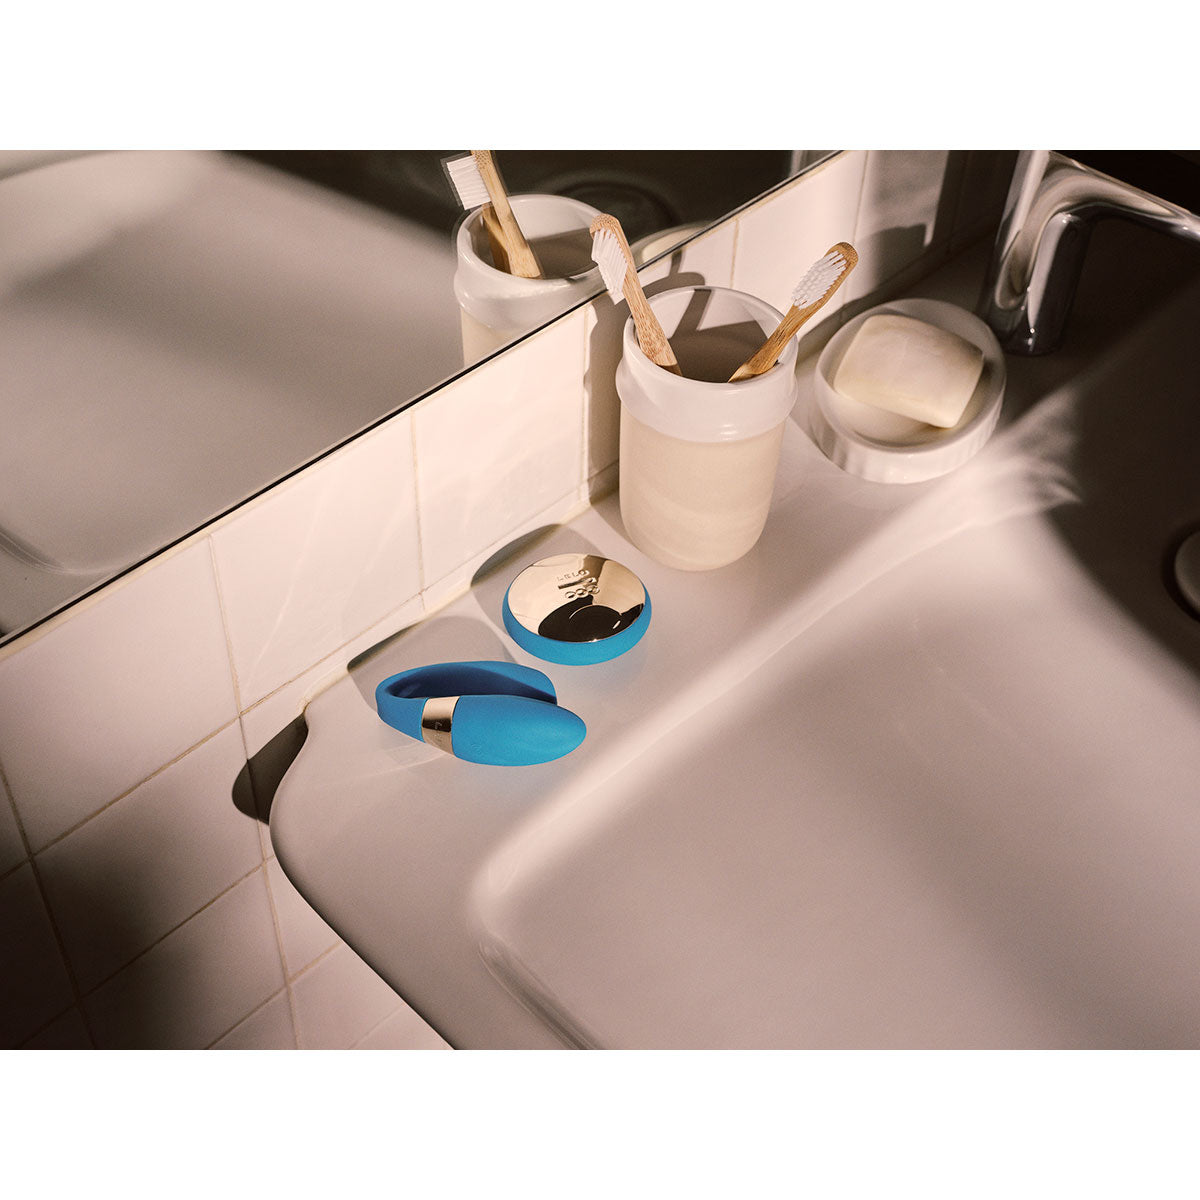 LELO TIANI DUO Rechargeable Dual Stimulation Couples Vibrator With Remote Ocean Blue - Zateo Joy